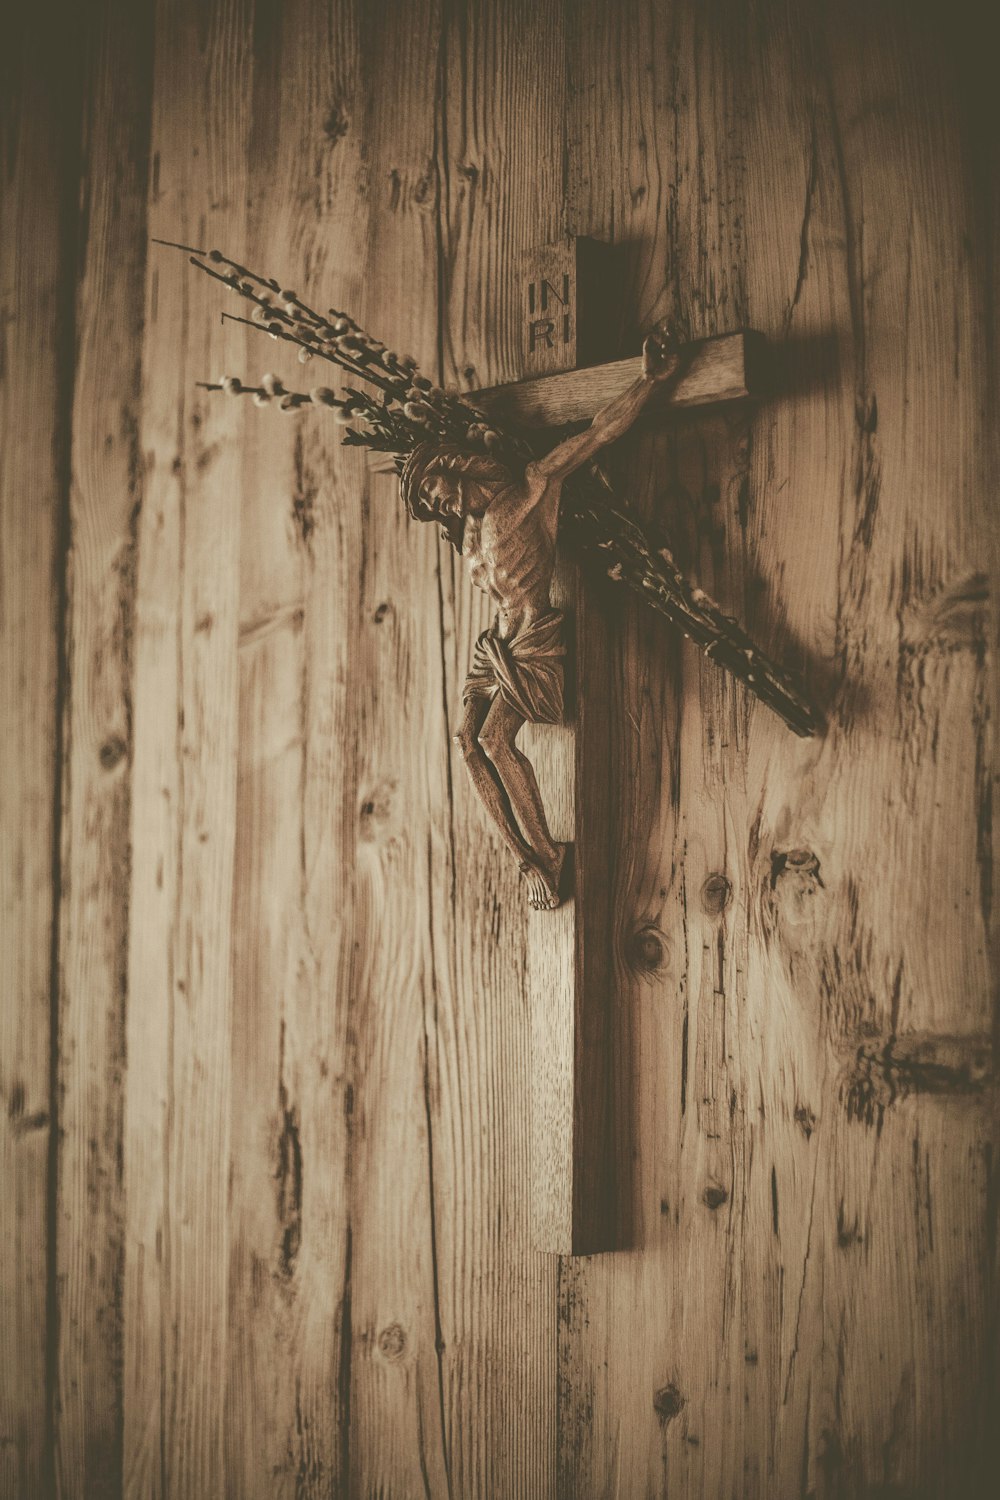 a cross on a wooden wall with chains hanging from it